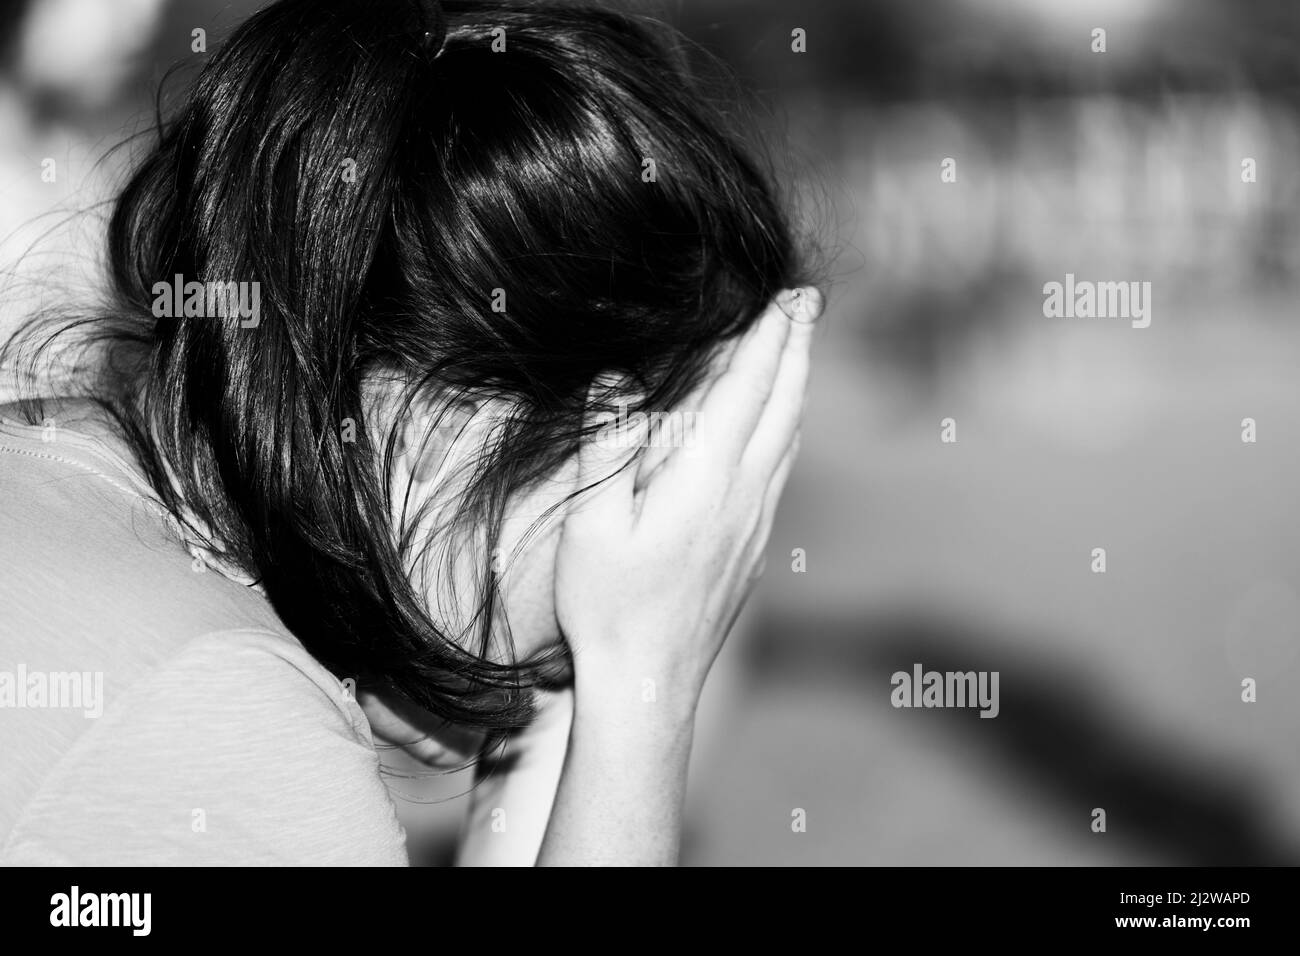 The woman covered her face with her hands. Black and white photo. High quality photo Stock Photo